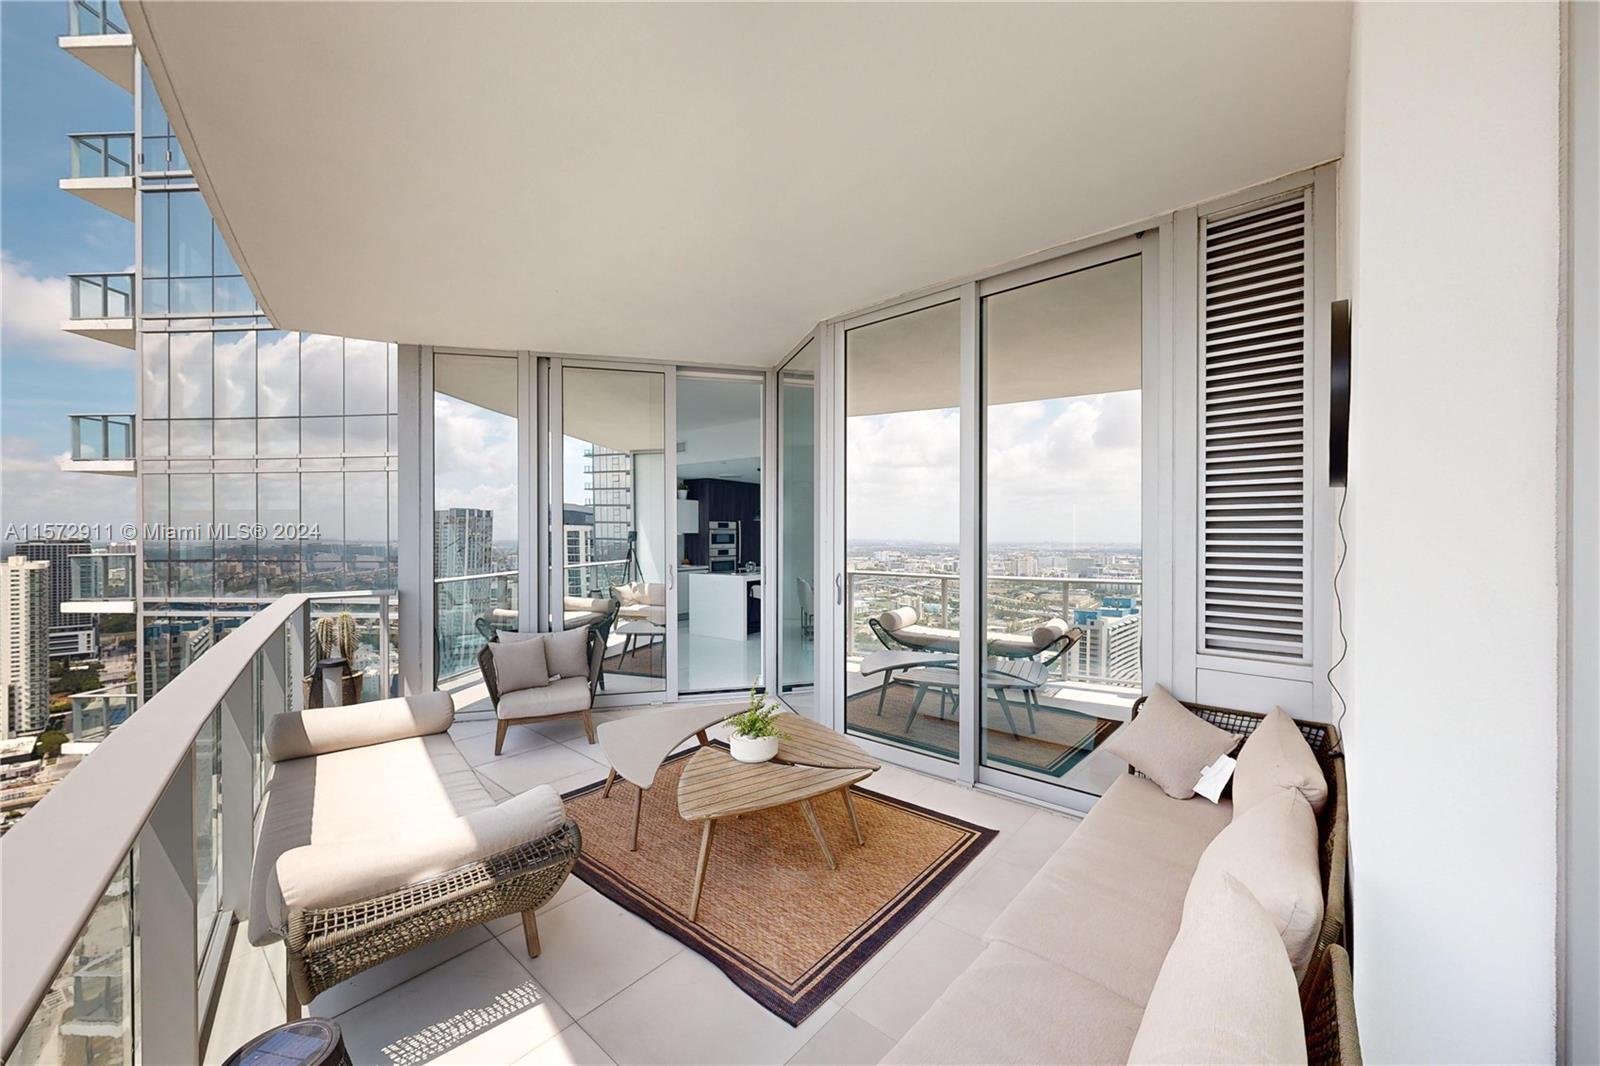 Discover unparalleled luxury living in the heart of Miami at this exquisite 1-bedroom, 1.5-bathroom condo in the renown Paramount Miami World Center. With stunning views of the city skyline and Biscayne Bay from your private balcony. Private entrance from elevator, state-of-the-art appliances, simple, modern charm throughout, along with other features you will be sure to love! Enjoy world-class amenities including a resort-style pool, fitness center, and concierge services, all just minutes away from the American Airlines Arena and Adrienne Arscht Performing Arts Center. Indulge in the vibrant culinary scene and upscale shopping at your doorstep, or unwind in the lush green spaces within the complex. Don't miss the chance to make this urban oasis your own—schedule a private viewing today!